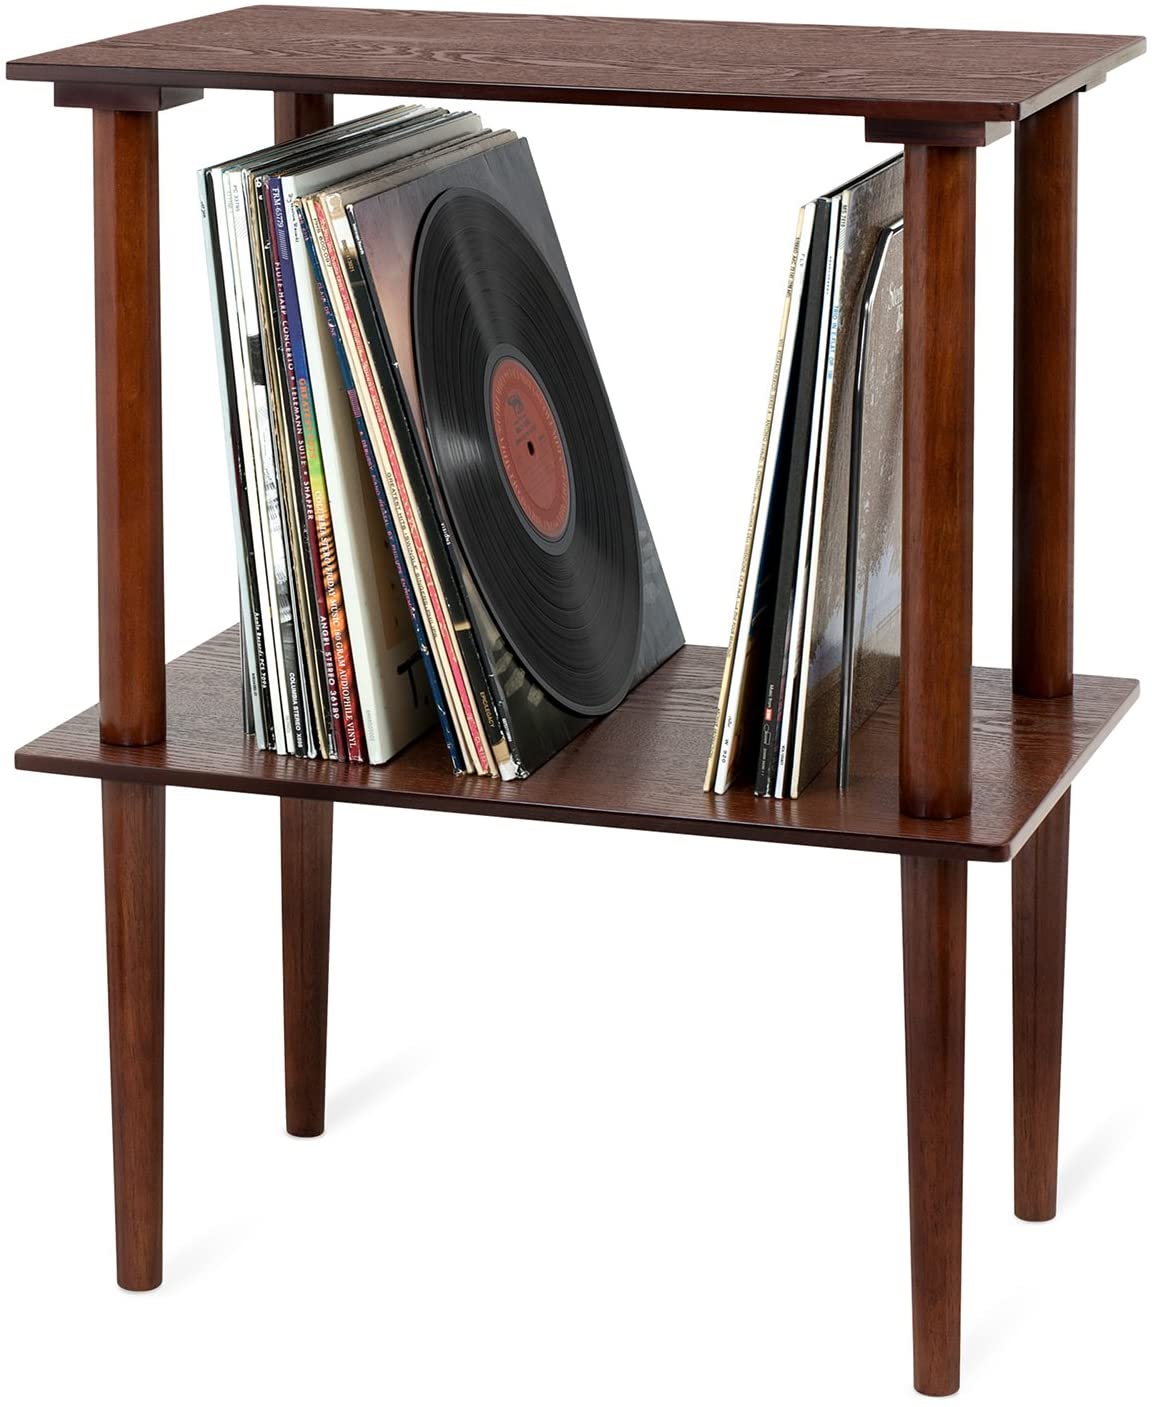 Victrola Wooden Stand for Wooden Music Centers with Vinyl Record Holder